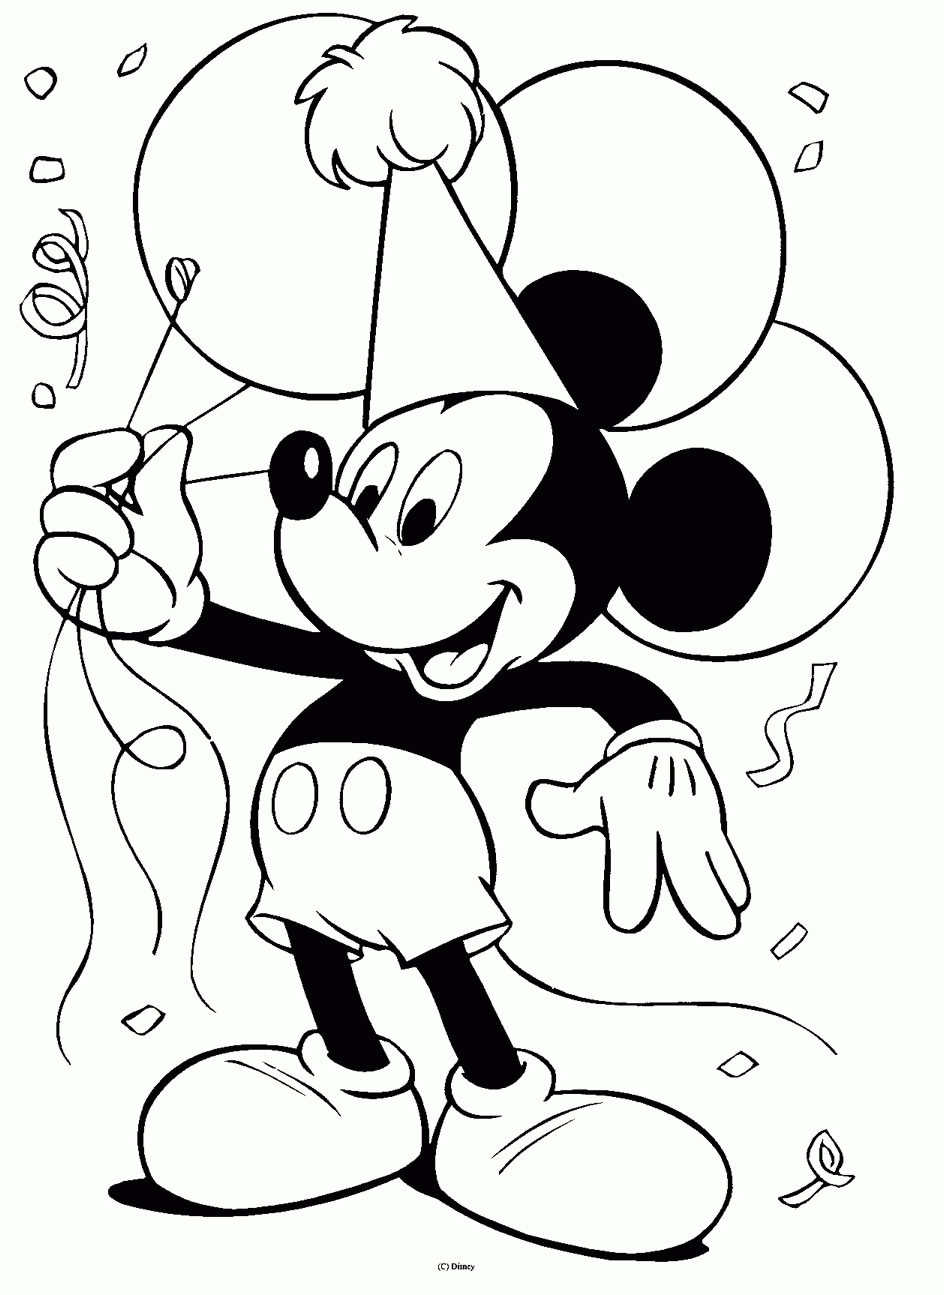 mickey and friends coloring pages mickey mouse friends coloring pages 4 disney coloring book coloring mickey and friends pages 